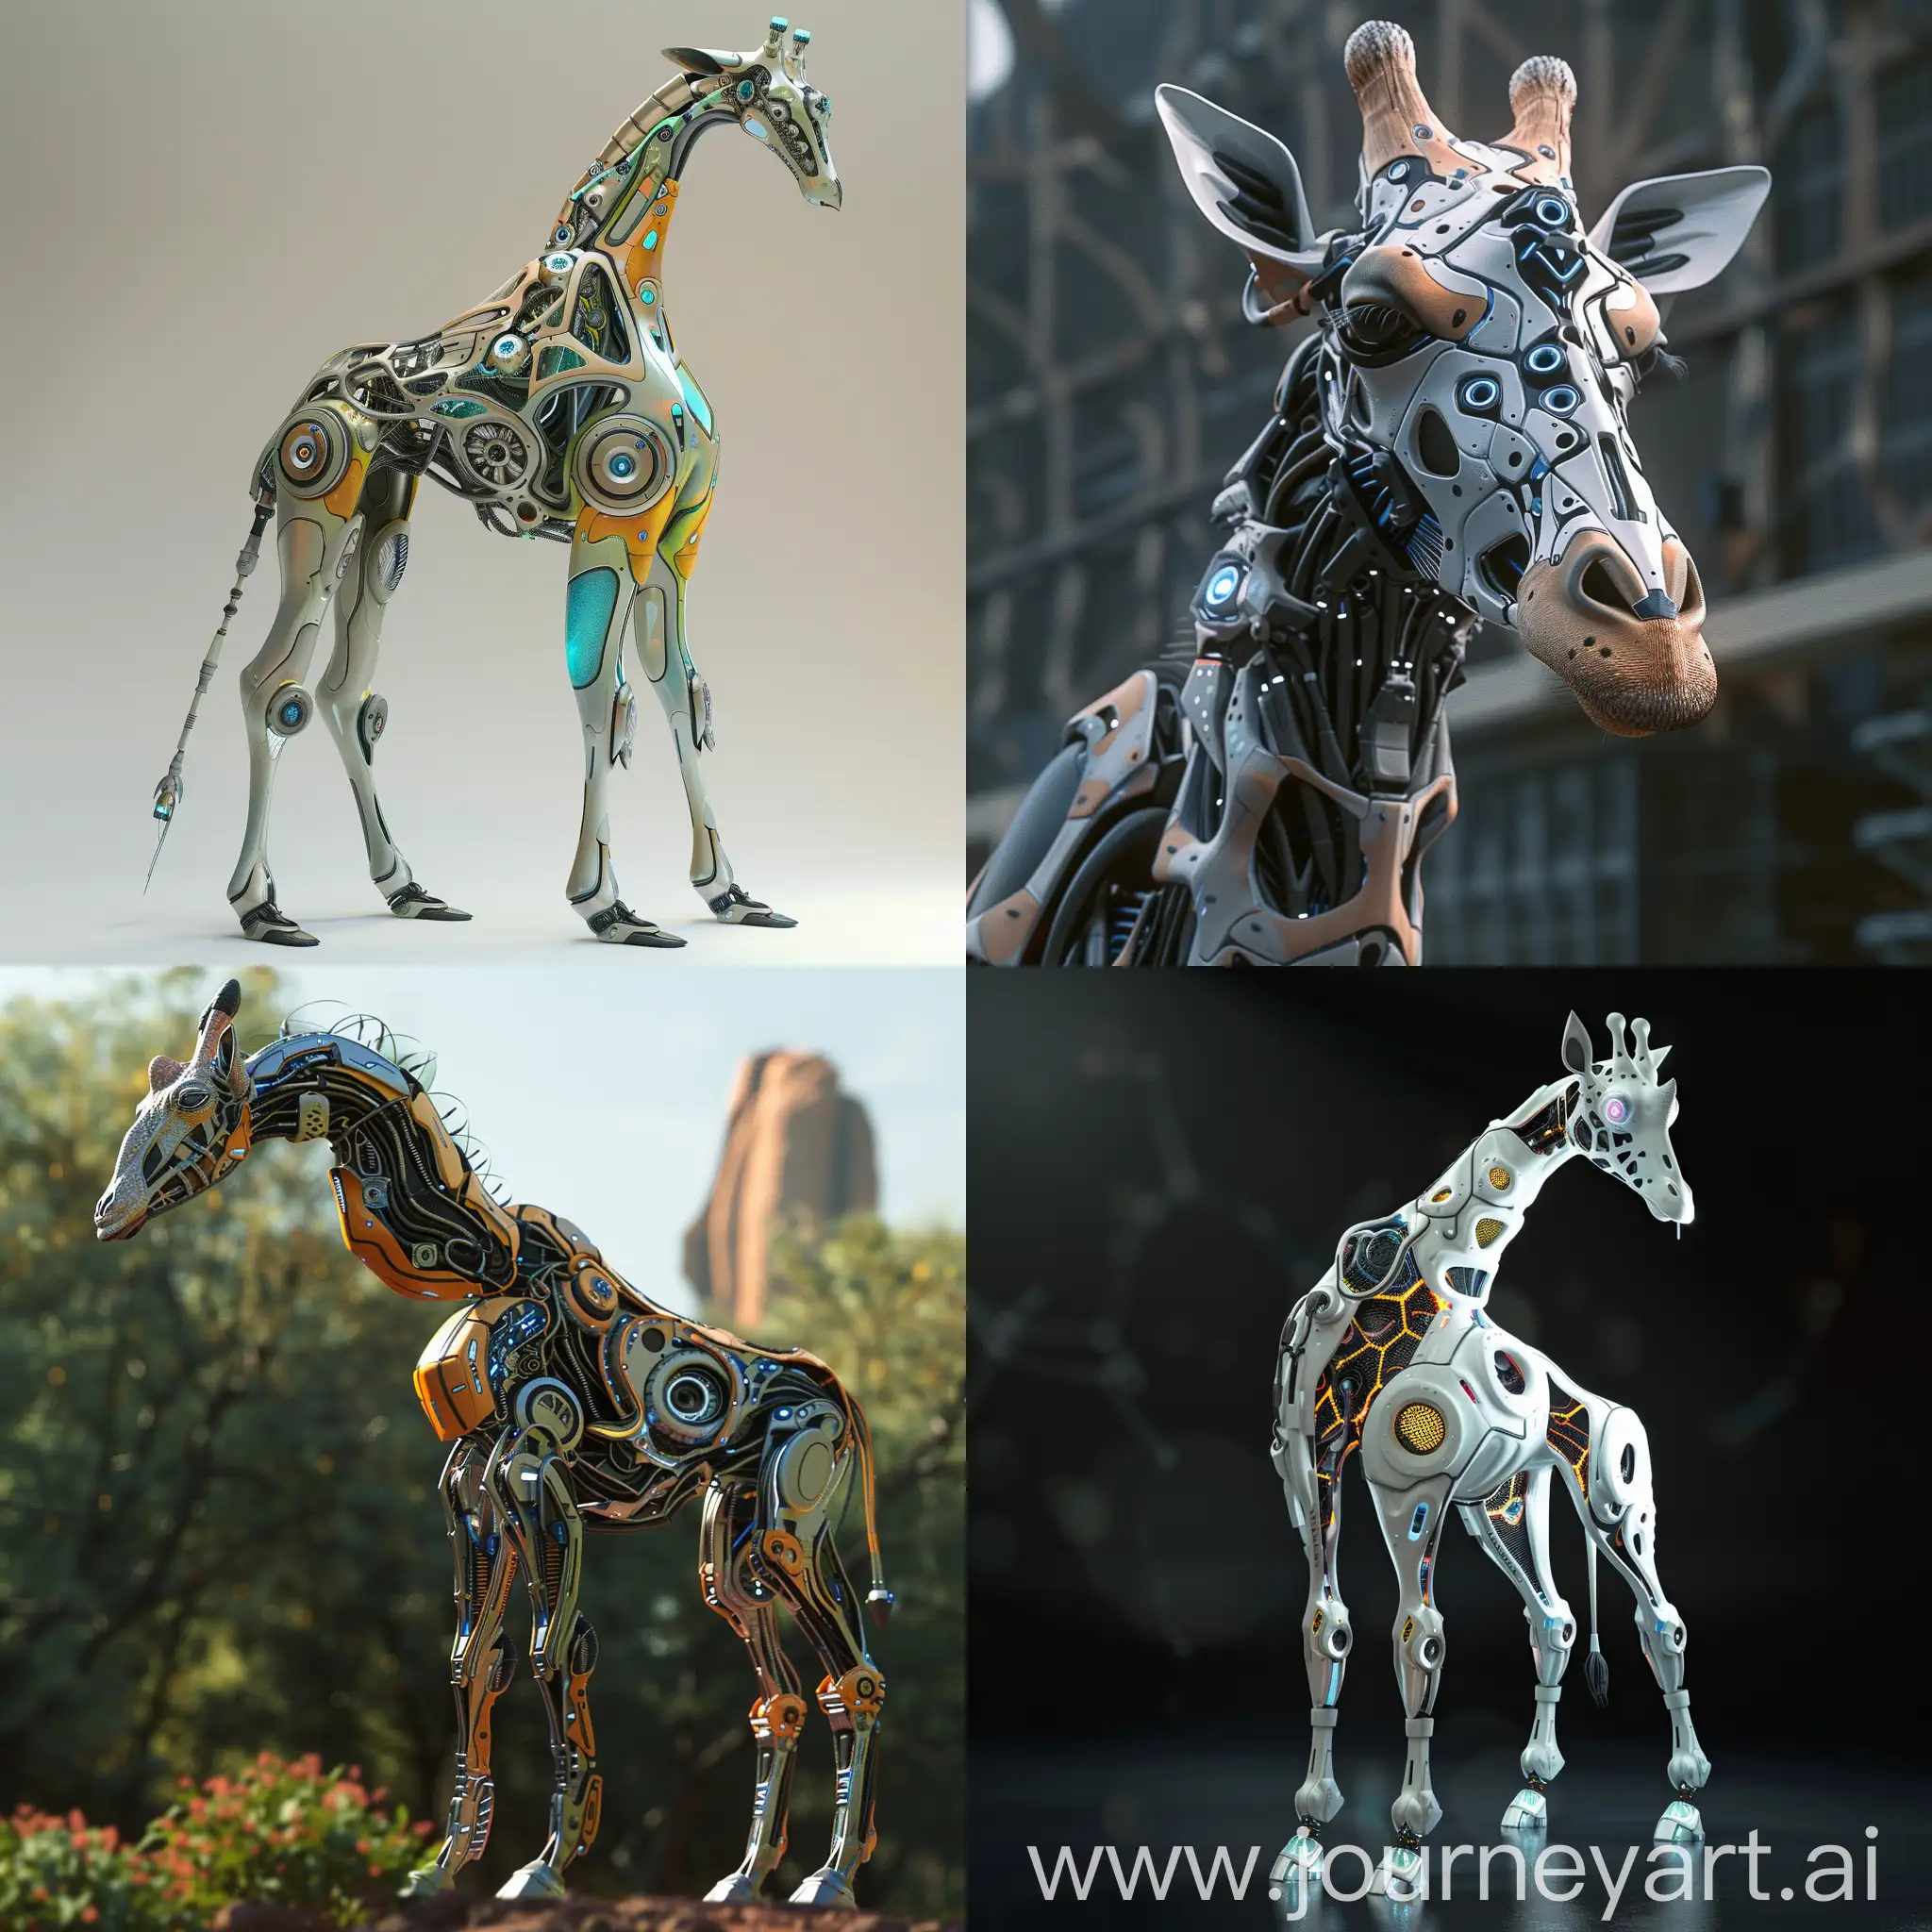 Futuristic giraffe, Aerodynamic Osseous Structure, Biomechanical Neck Extensors, Solar-Powered Energy Core, Enhanced Reticuloendothelial System, Neuro-Augmented Sensory Perception, Cybernetic Stomach with Advanced Digestion, Self-Repairing Nanobots, Neural Language Processing for Communication, Holographic Marking System, Electromagnetic Propulsion System, Synthetic Muscle Weave, Neural Network Integration, Genetically Engineered Florabiome, Self-Evolving Nanobots, Symbiotic Photosynthetic Cells, Brain-Computer Interface with Emotional Feedback, Implanted Interspecies Translator, Adaptive Osseous Conversion, Energy-Dispersal Field, Conscious Holographic Projection, Aerodynamic Skin Ridges, Integrated Solar Panels, Kinetic Tail Displays, Holographic Horn Displays, Retractable Eye Shields, Variable Length Neck, Multi-Functional Hooves, Internal Shock Absorbers in Legs, Heat Dissipation Vents, Fiber Optic "Mane", Morphing Bio-Armor, Neural Luminescence, Implanted Interspecies Communication Ports, Kinetic Energy Harvesting Plates, Augmented Reality Projection Field, Symbiotic Drone Network, Modular Limb Extensions, Light-Bending Camouflage, Neural Tentacles, downloadable Personalities, unreal engine 5 --stylize 1000